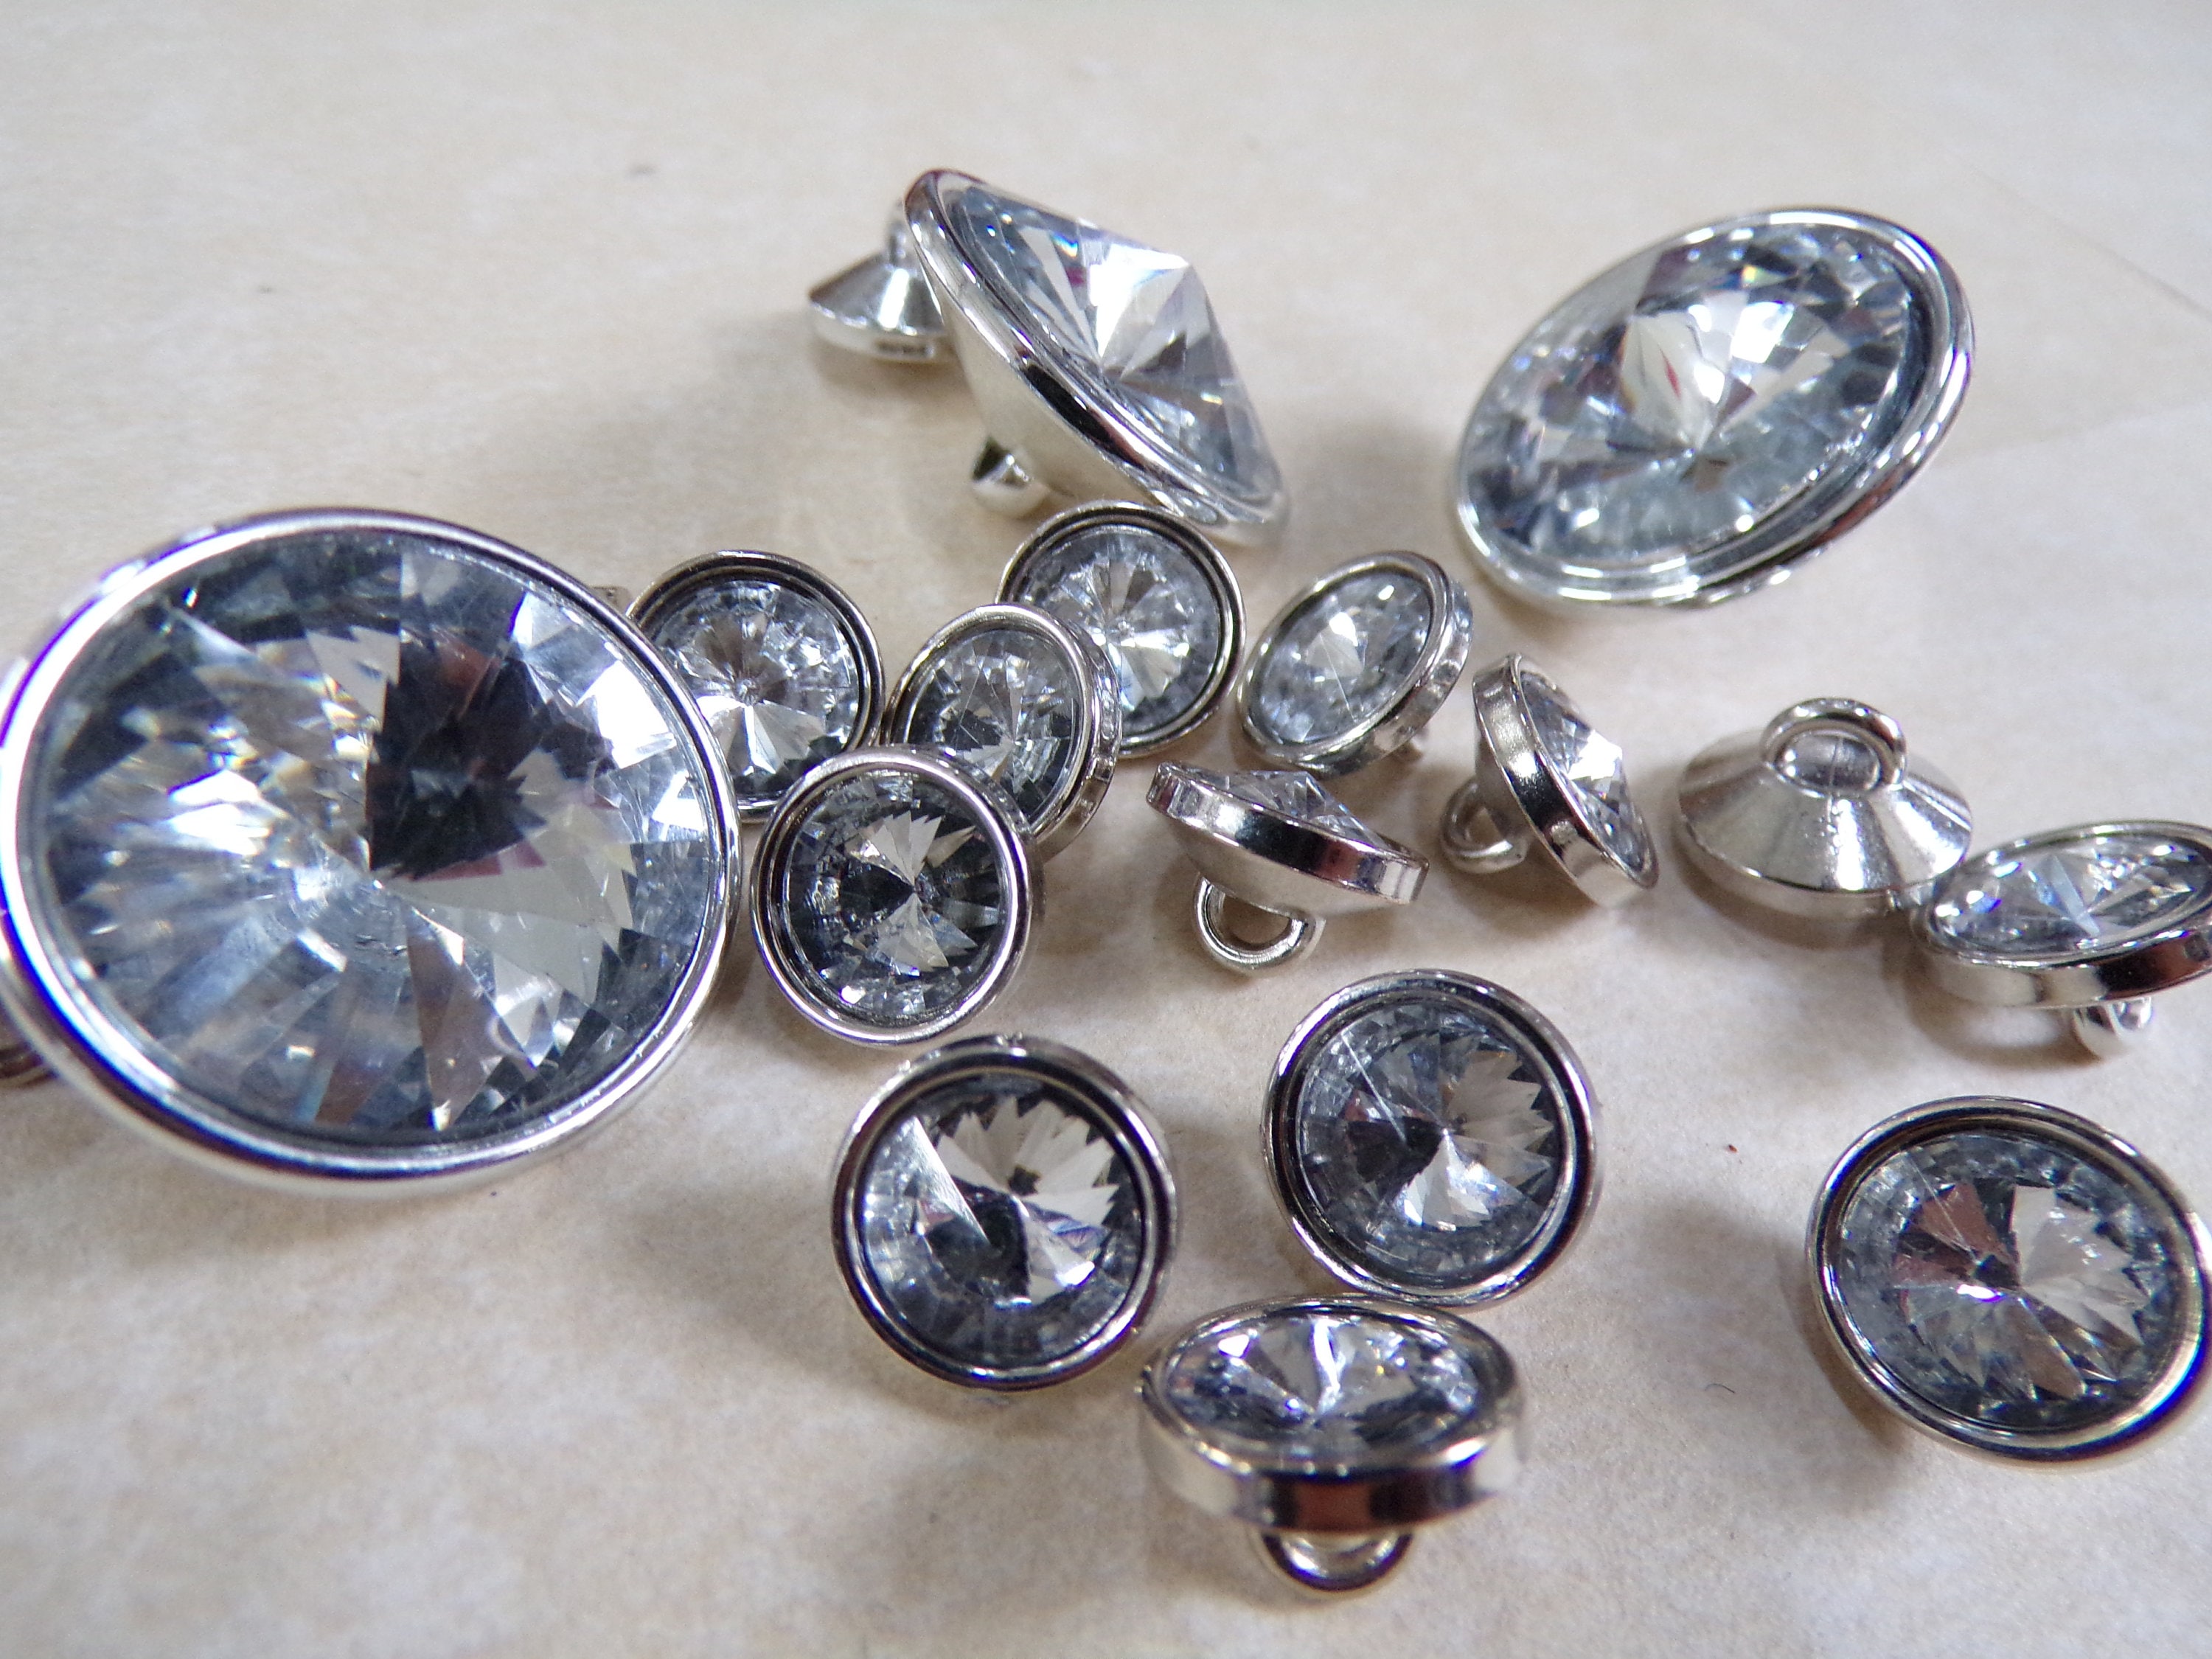 10 Pcs,crystal Buttons,round Buttons,rhinestone Buttons,buttons  W/shank,flower Center,silver Rhinestones,shank Buttons. 